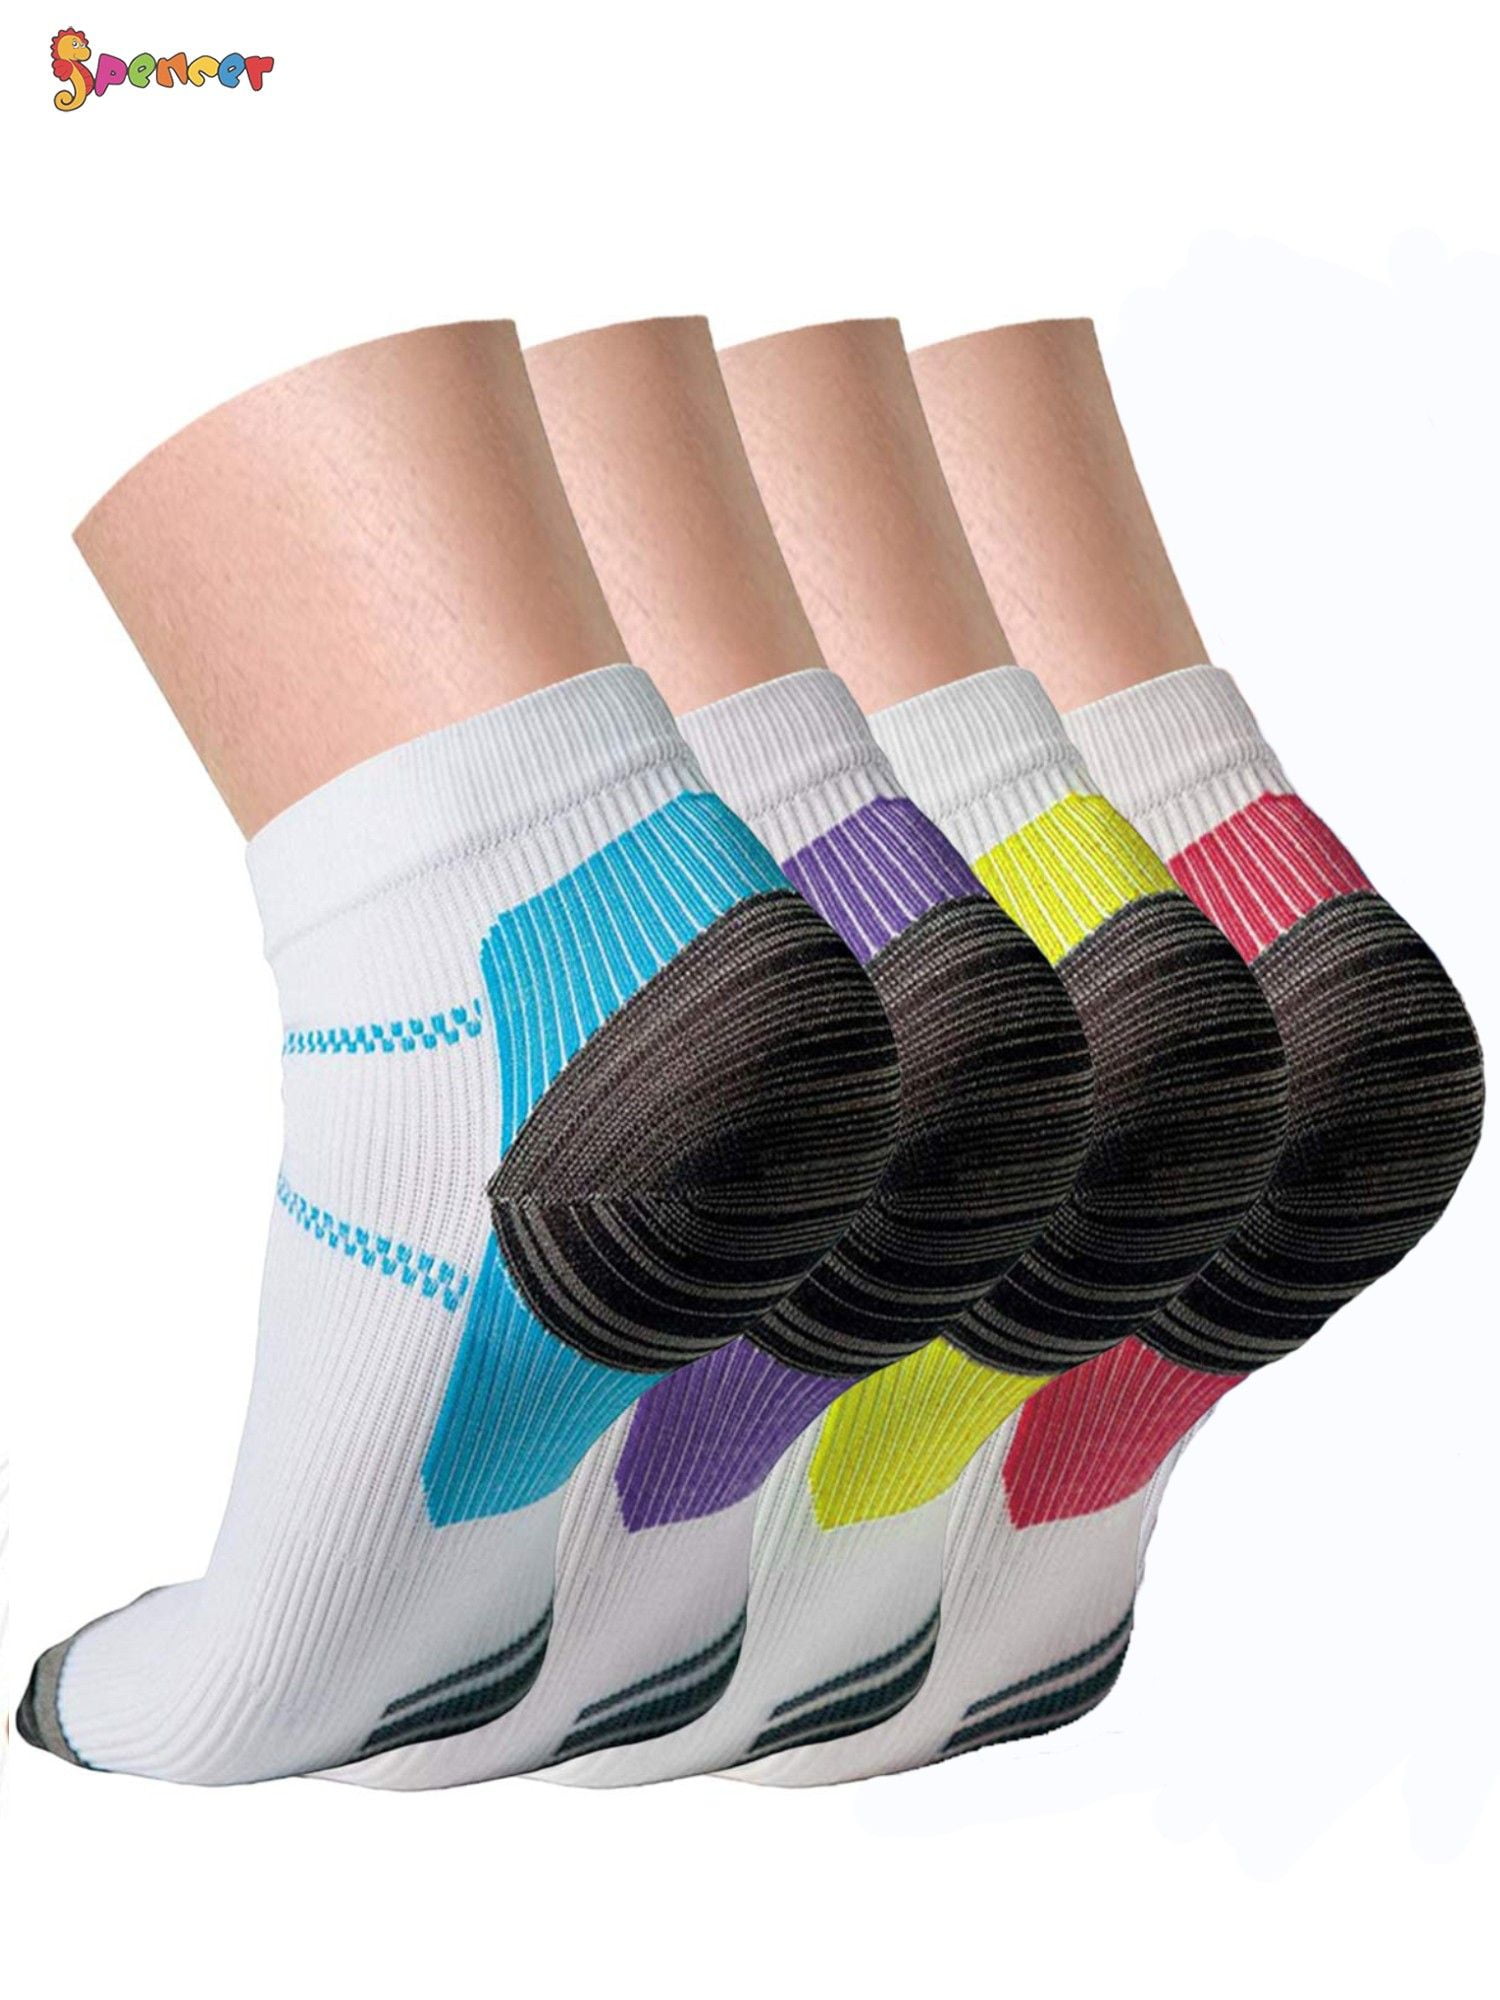 Compression Socks 3/6 Pairs for Women & Men,Sport Plantar Fasciitis Arch Support Running Gym Knee High Compression Sock